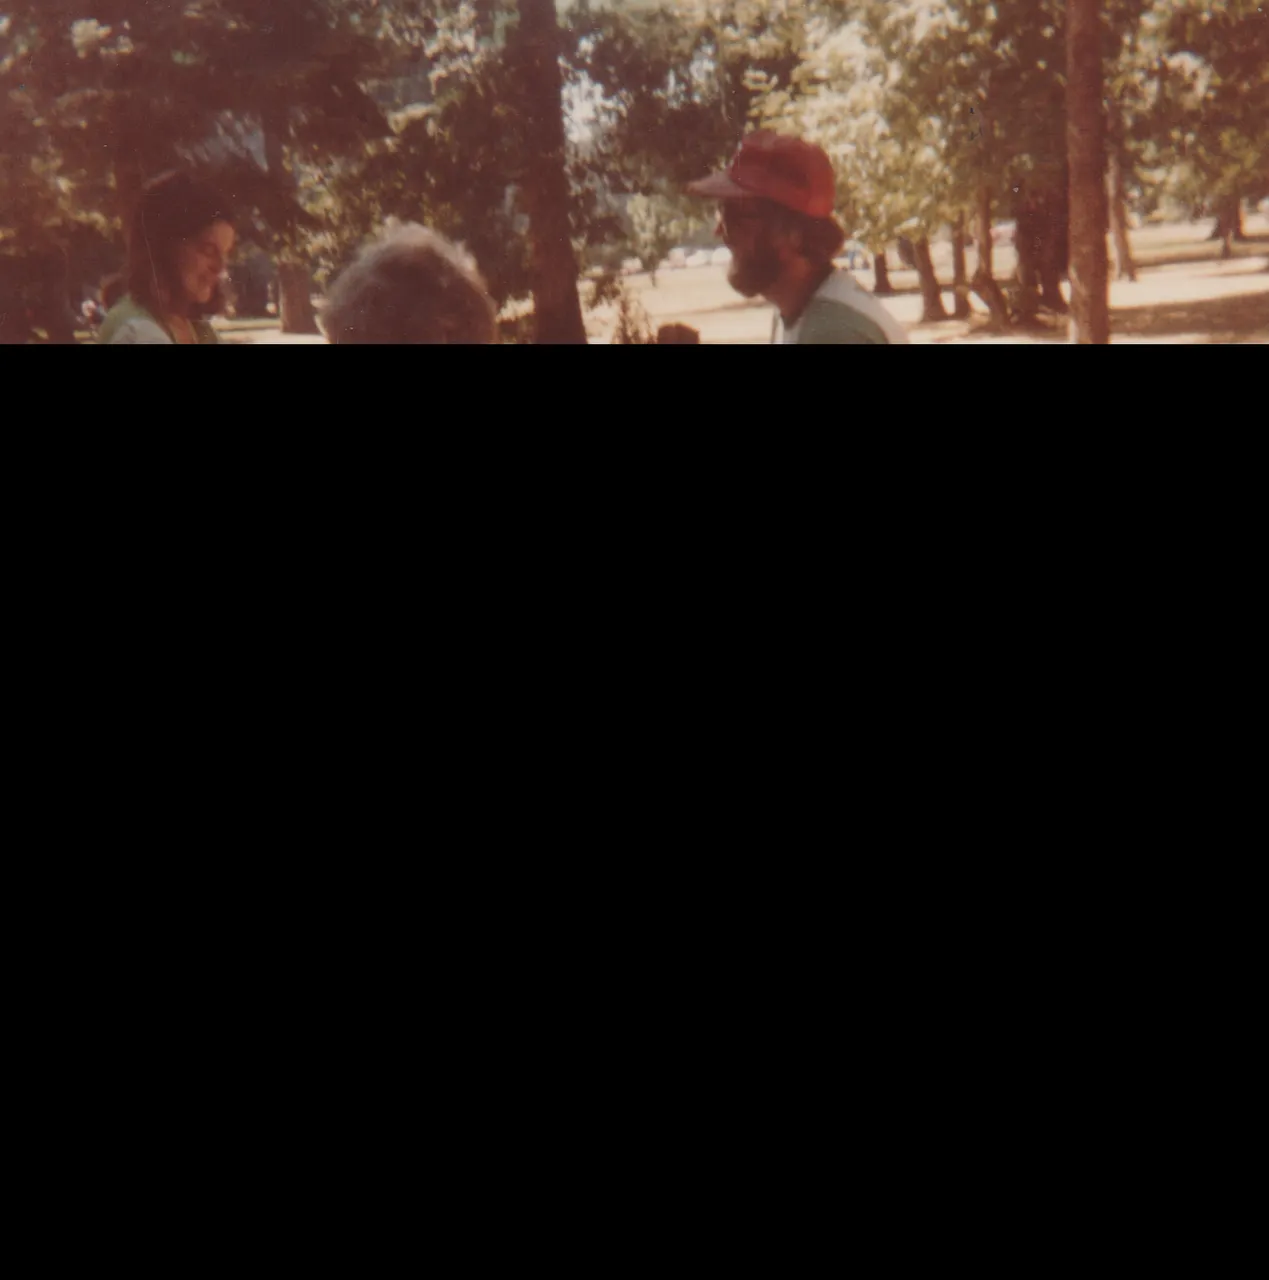 1980-08-22 - Friday - Jim, Karen, Ann Pickell, outside, picnic, park, could be camping, but not sure exactly where or what-3.png